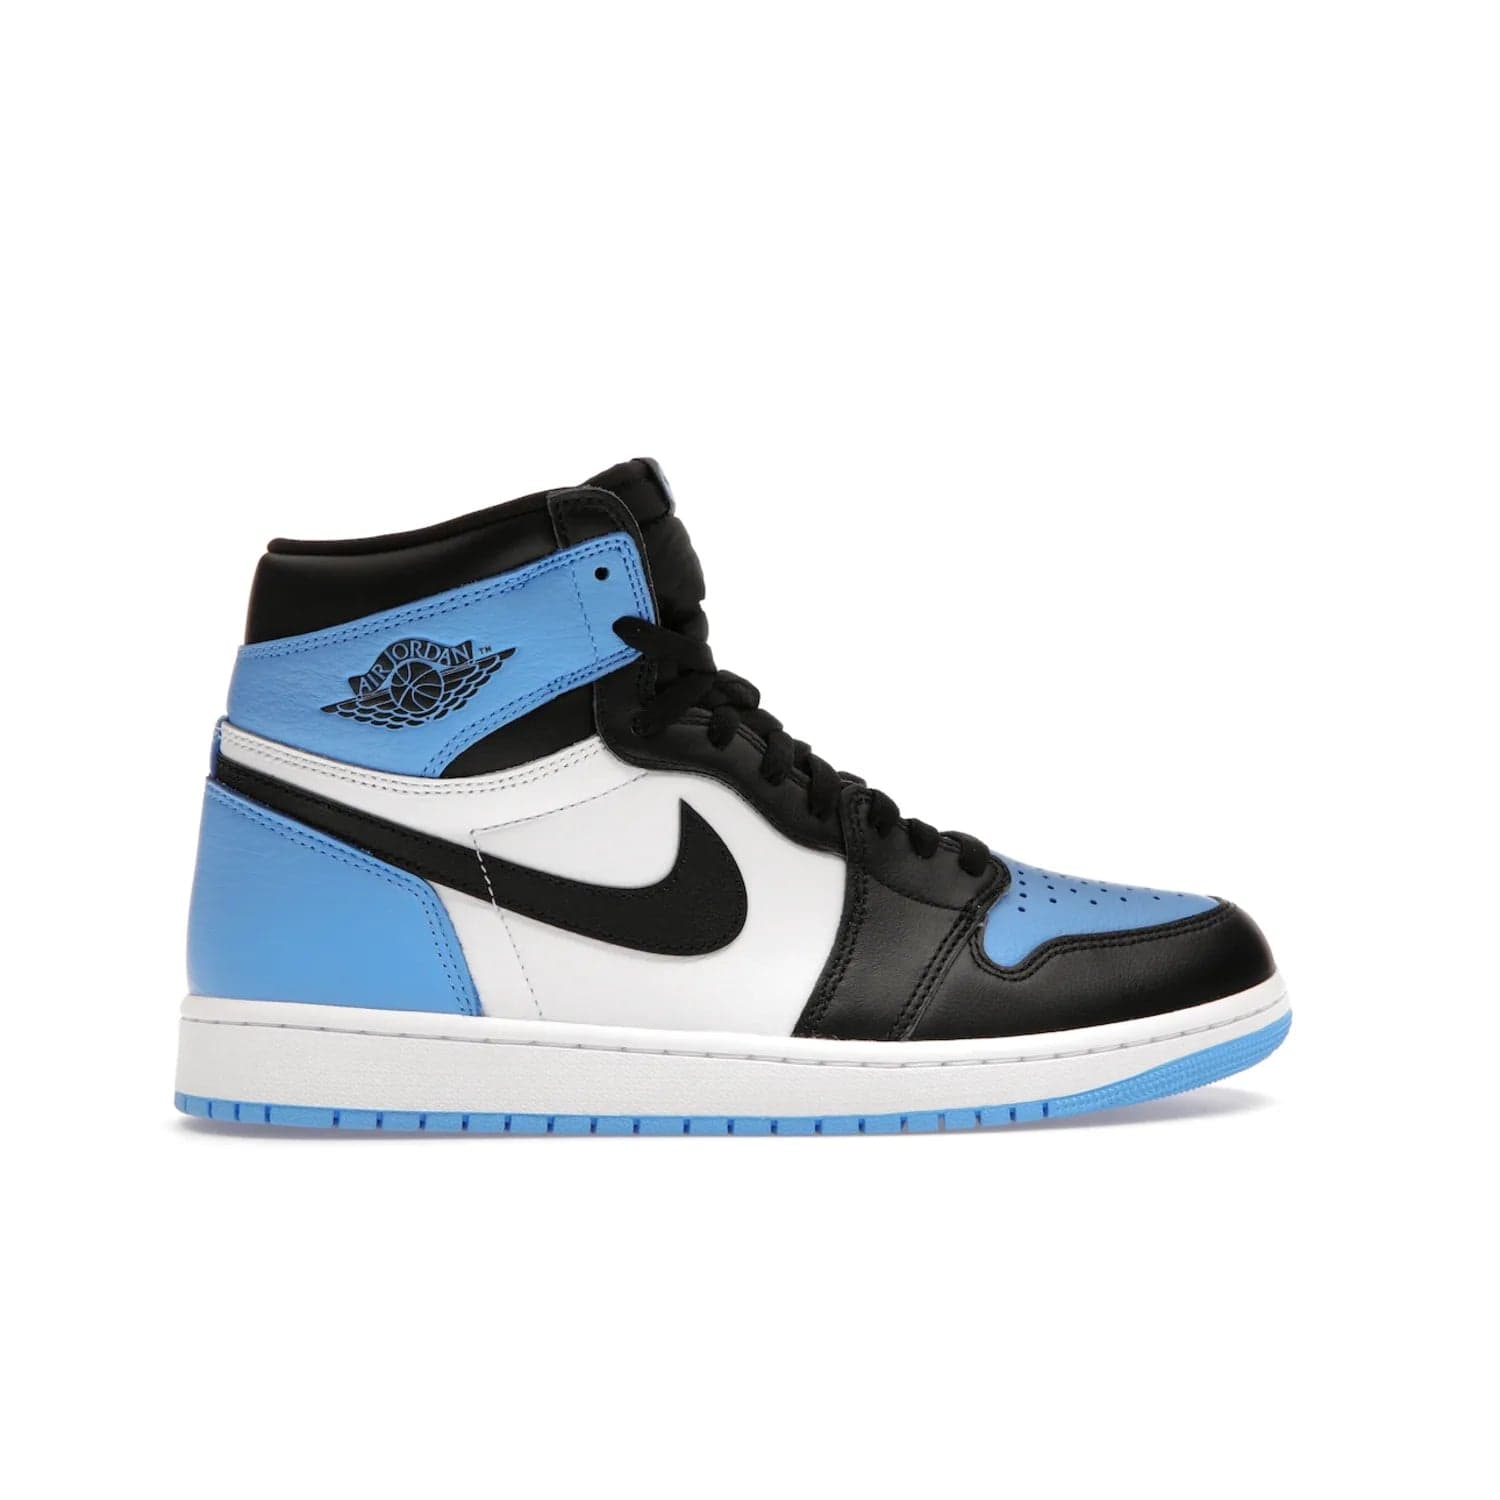 Jordan 1 Retro High OG UNC Toe - Image 36 - Only at www.BallersClubKickz.com - Jordan 1 High OG UNC Toe is a fashionable, high-quality sneaker featuring University Blue, Black White and White. Releasing July 22, 2023, it's the perfect pick up for sneakerheads.